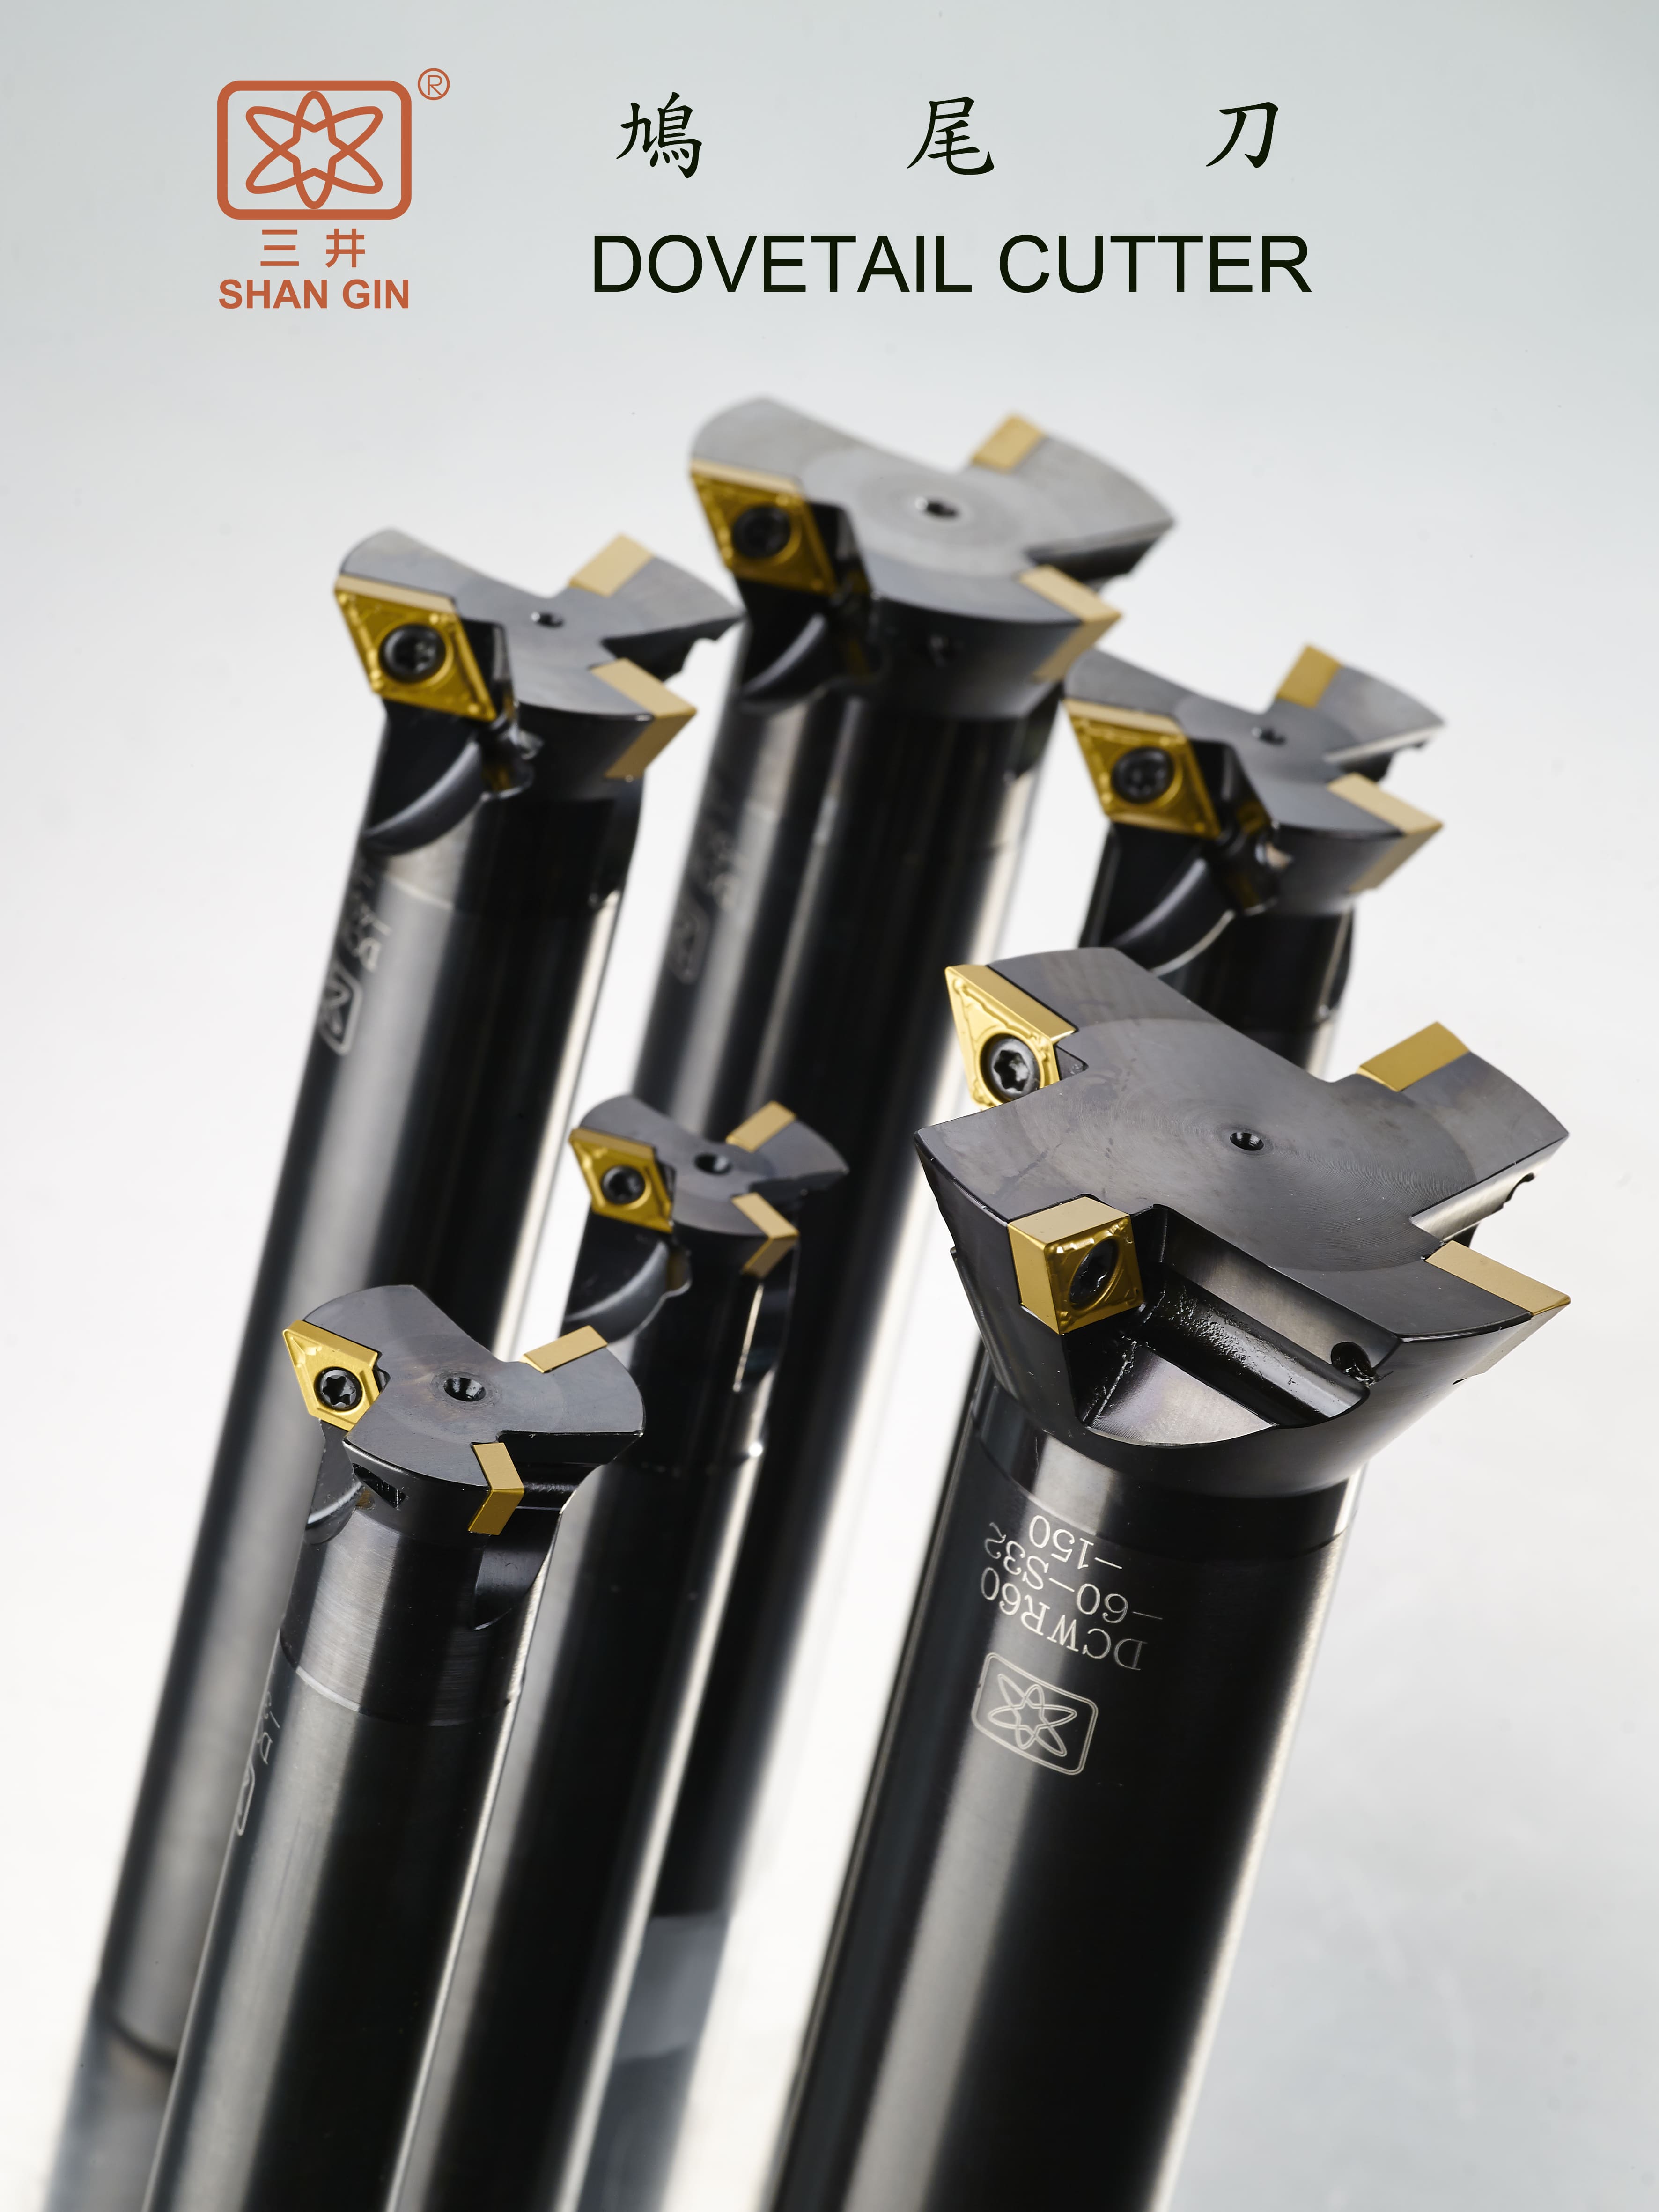 Products|DOVETAIL CUTTER